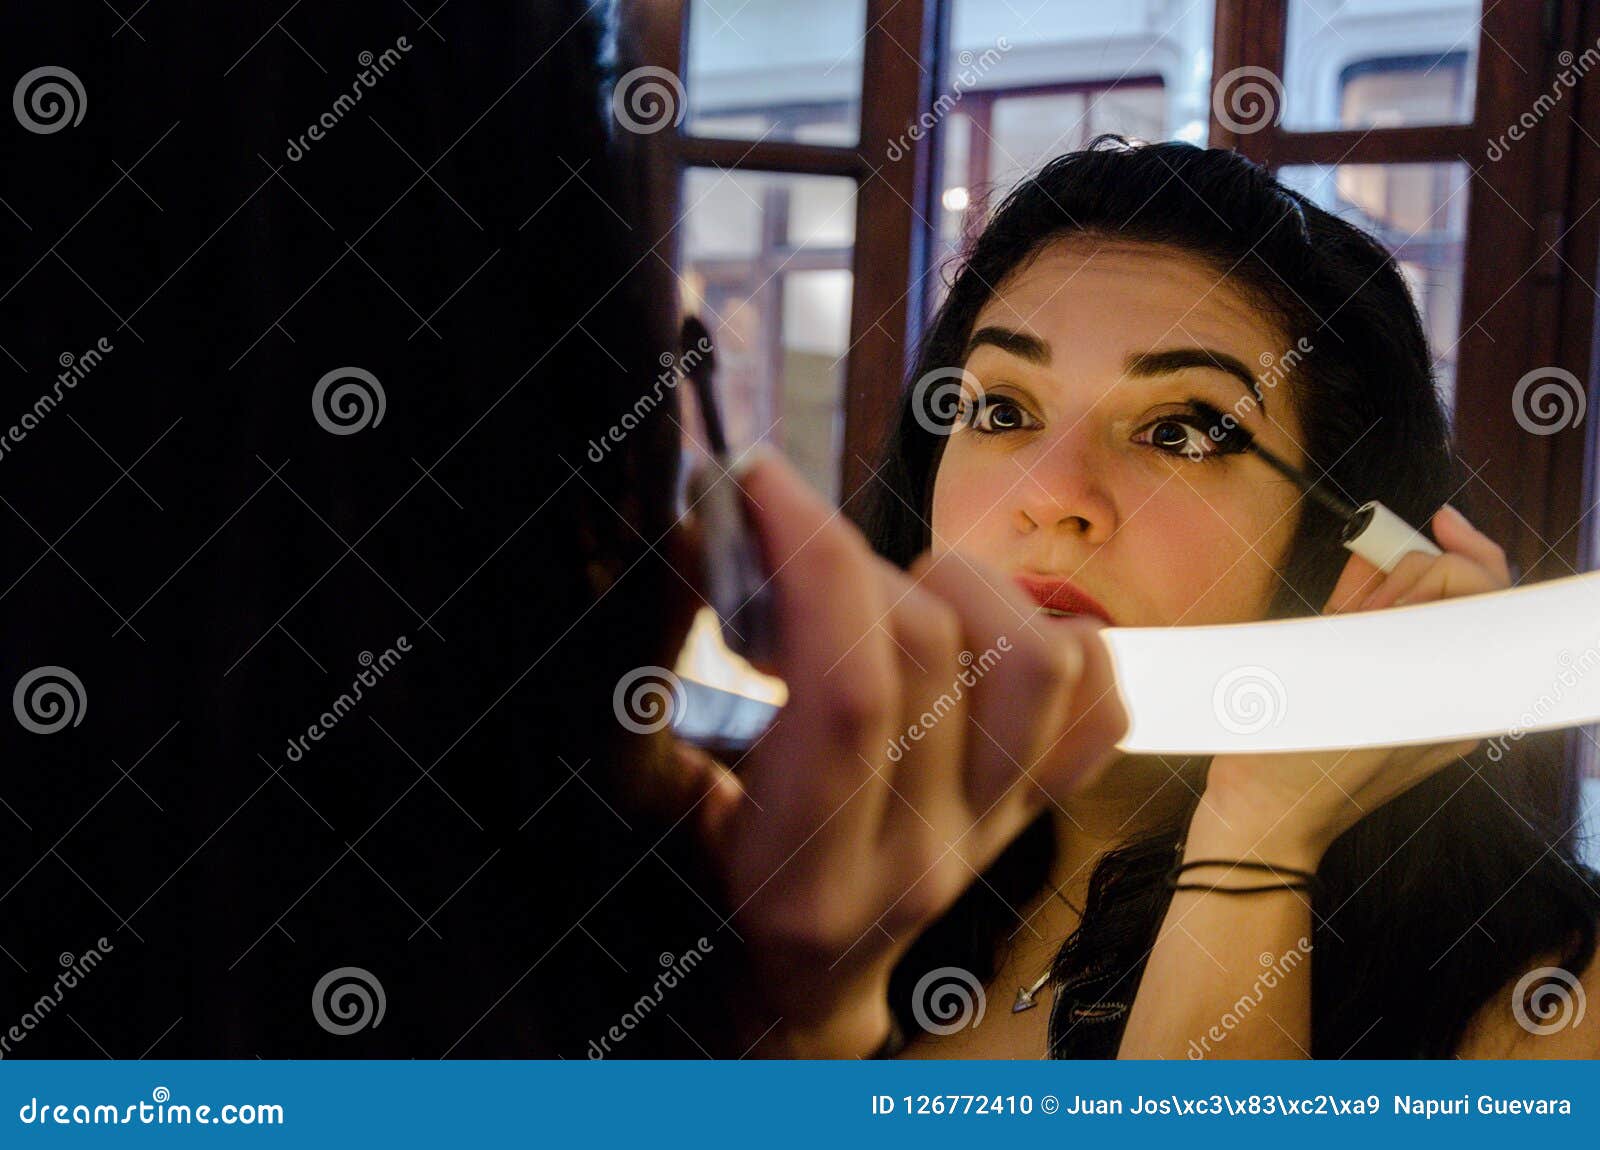 Chubby Woman Putting On Some Makeup Stock Photo Image Of Chubby